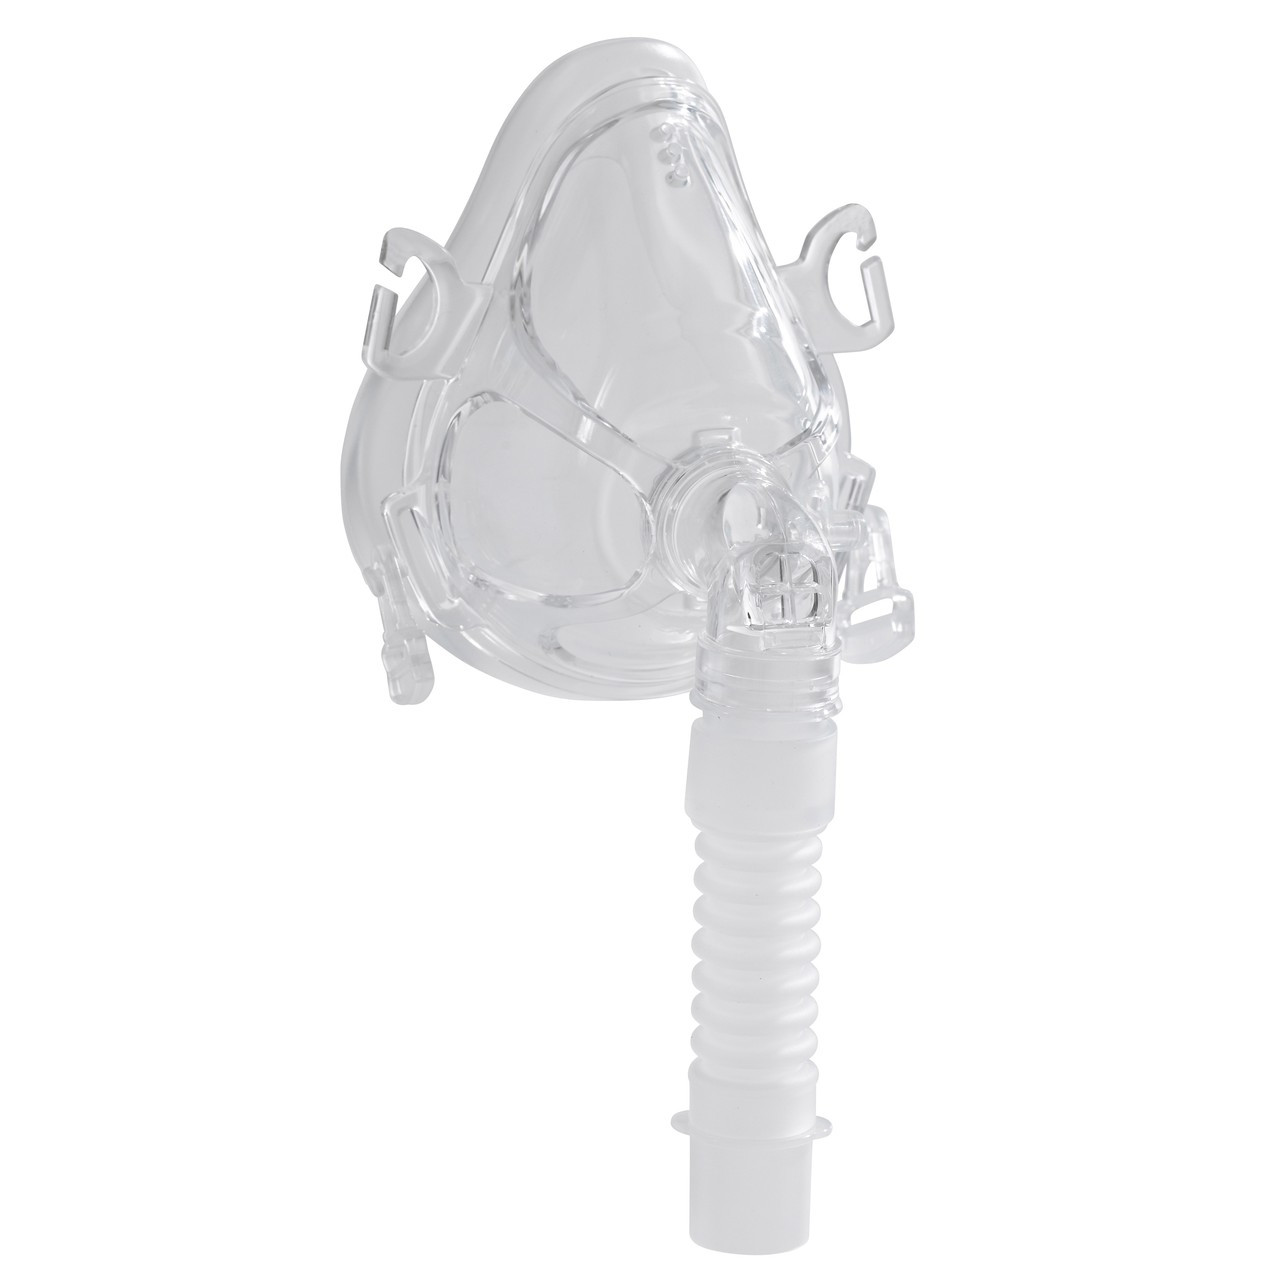 Drive Devilbiss 100FDL-NH ComfortFit Deluxe Full Face CPAP Mask without Headgear, Large (100FDL-NH)